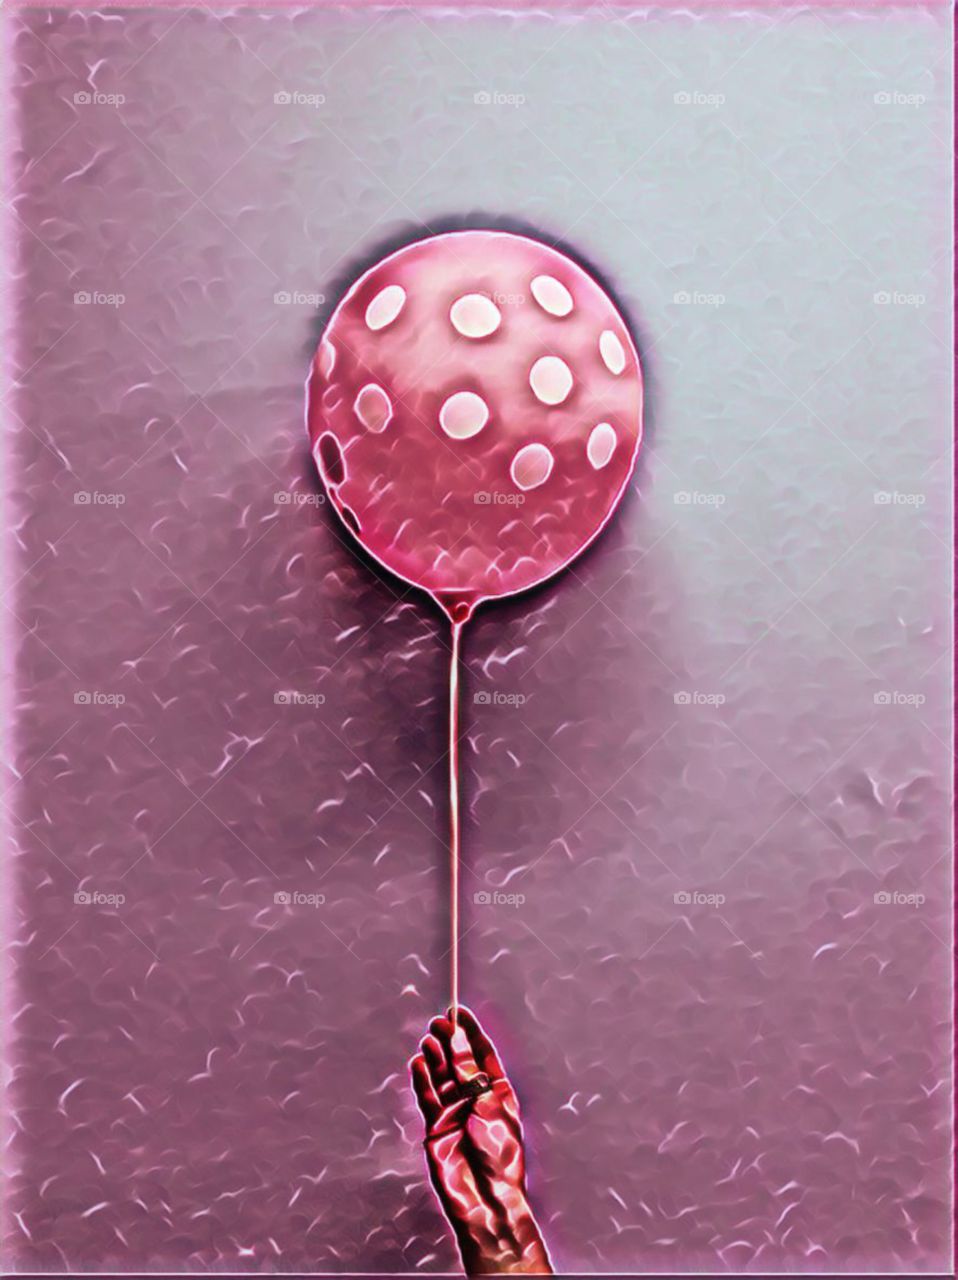 Picture of a balloon